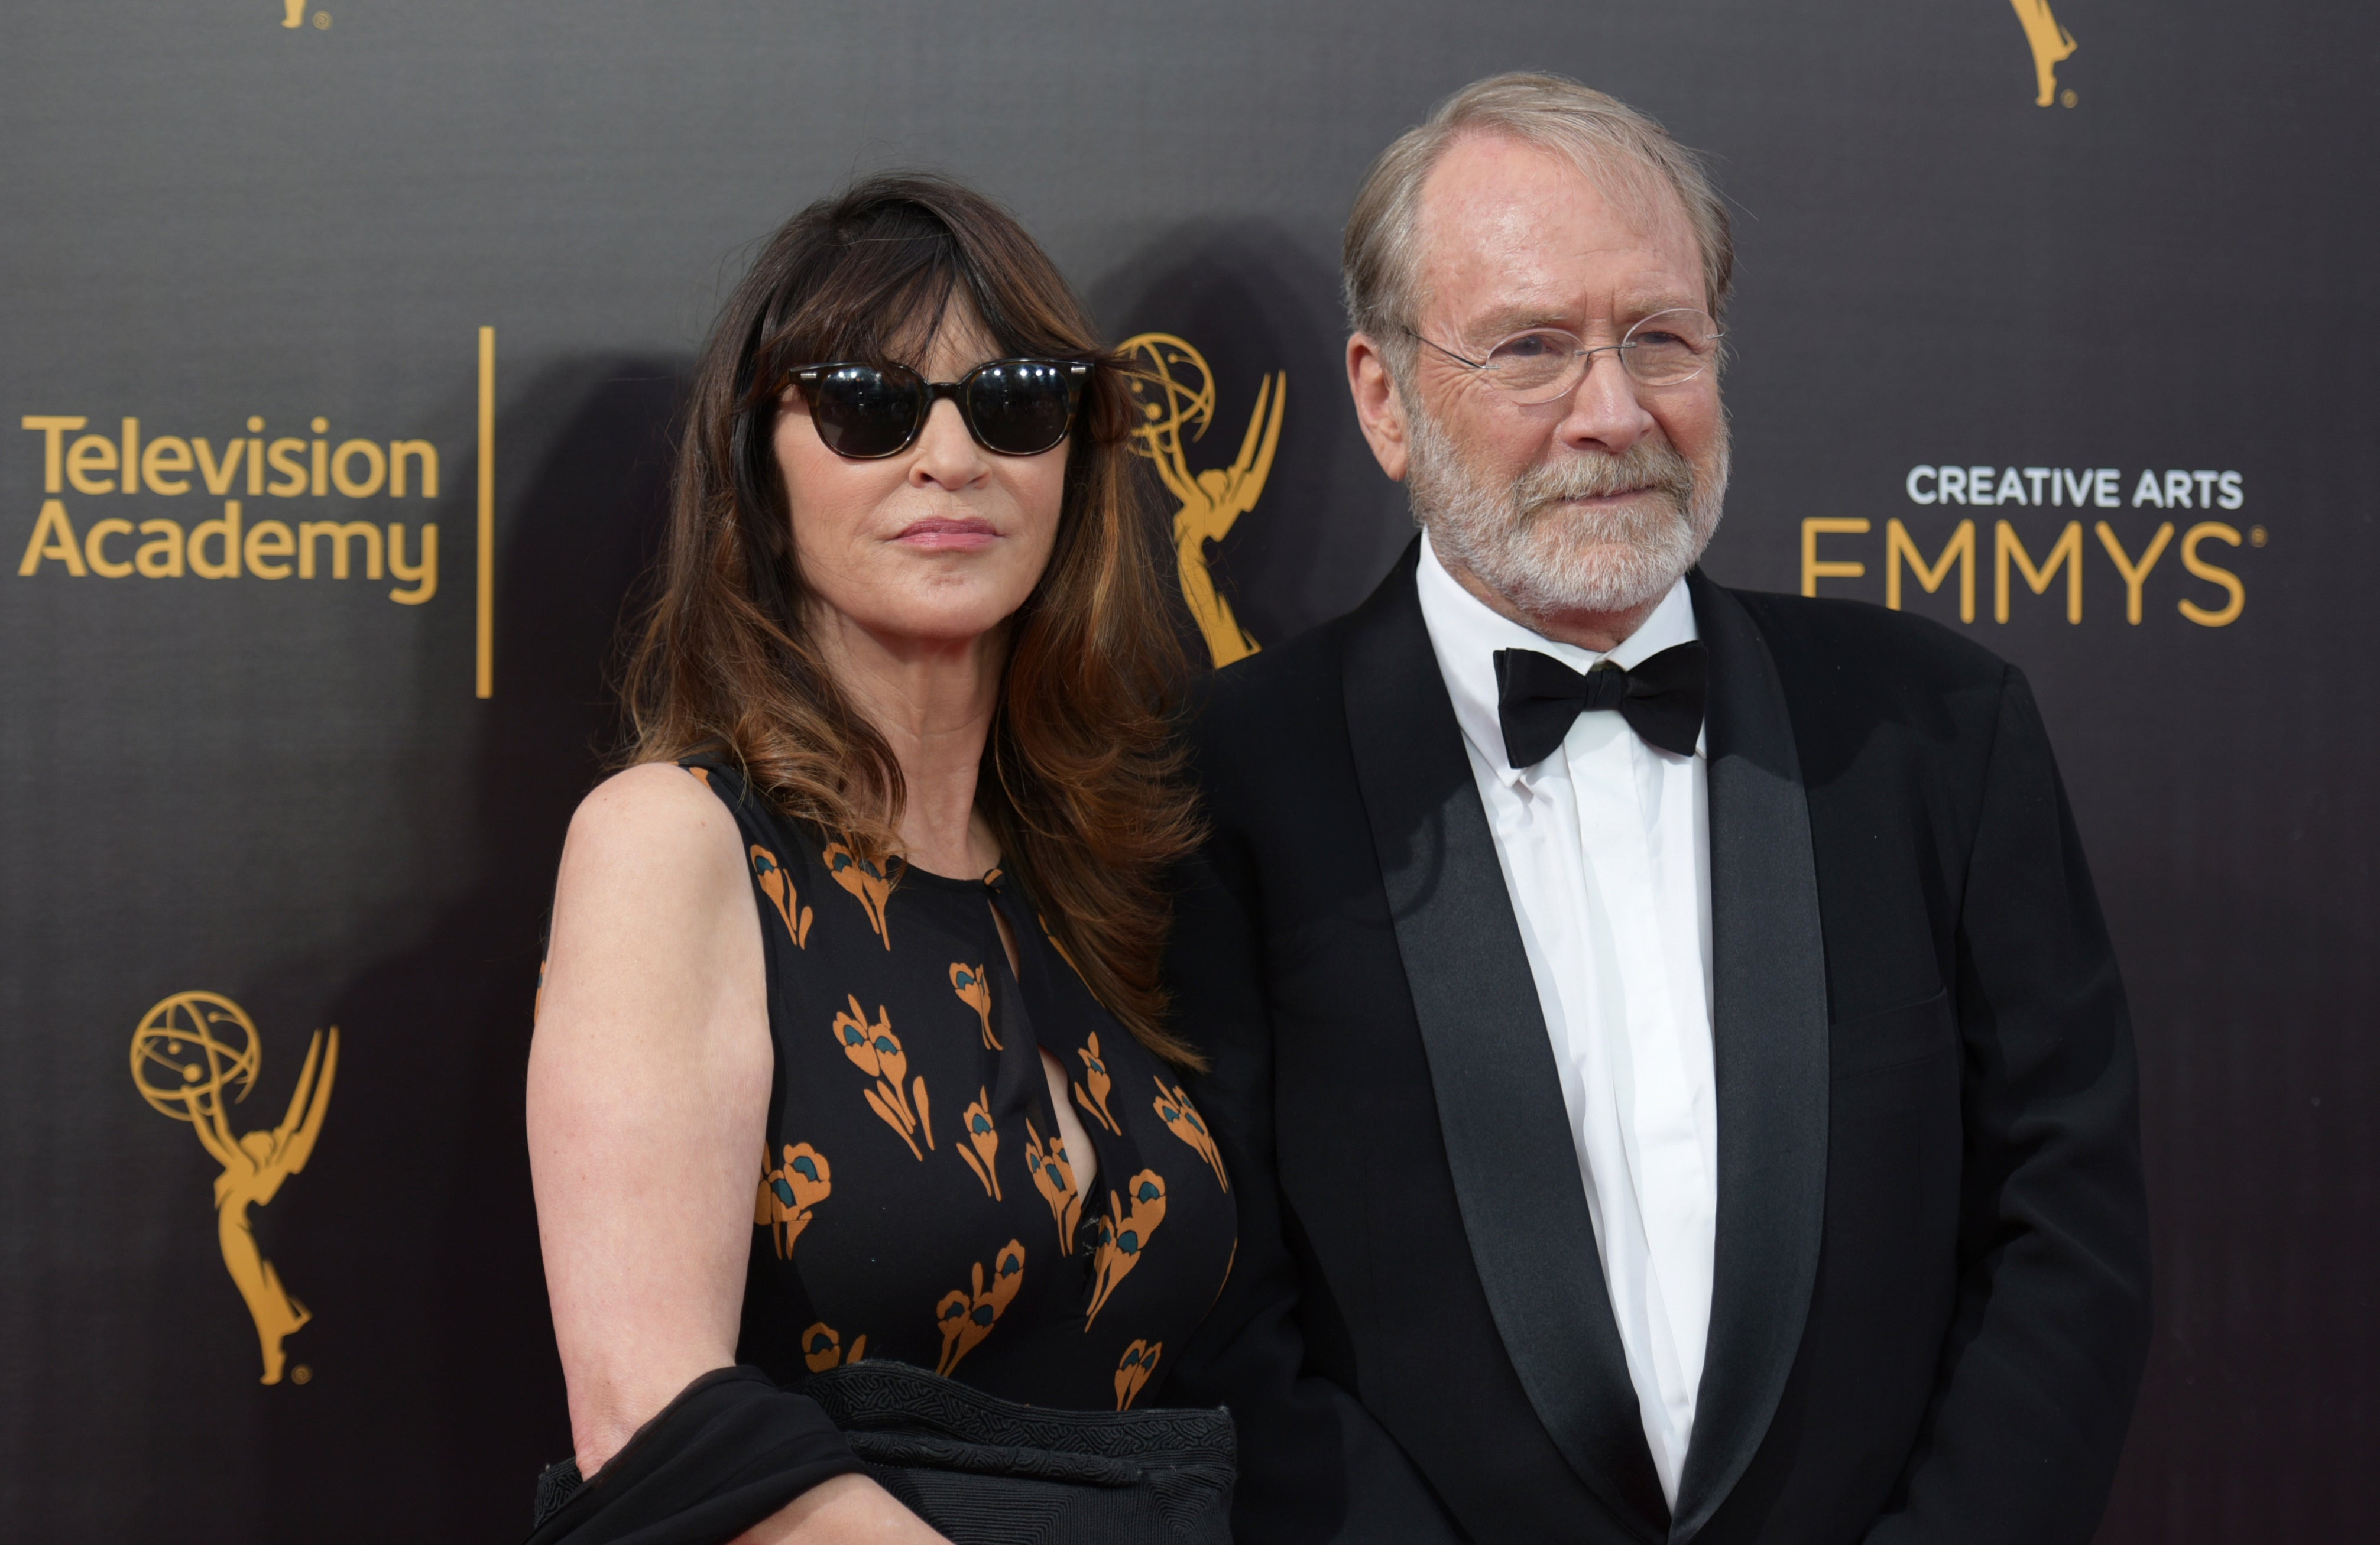 roseanne, sabrina the teenage witch, arrested development, arrested development star martin mull dies age 80